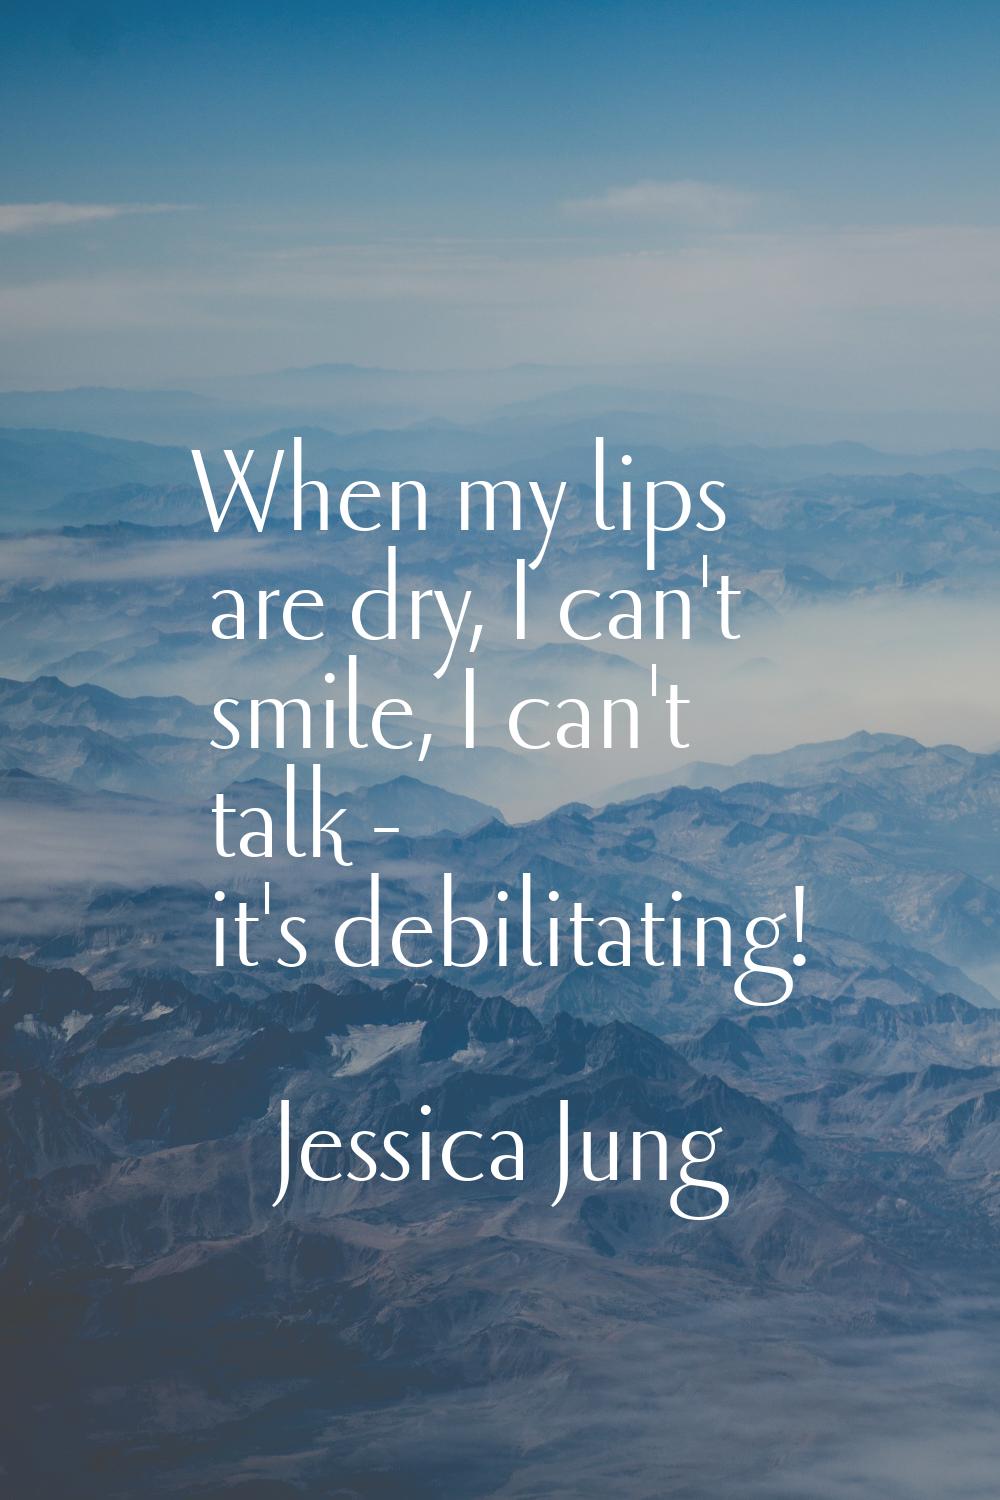 When my lips are dry, I can't smile, I can't talk - it's debilitating!